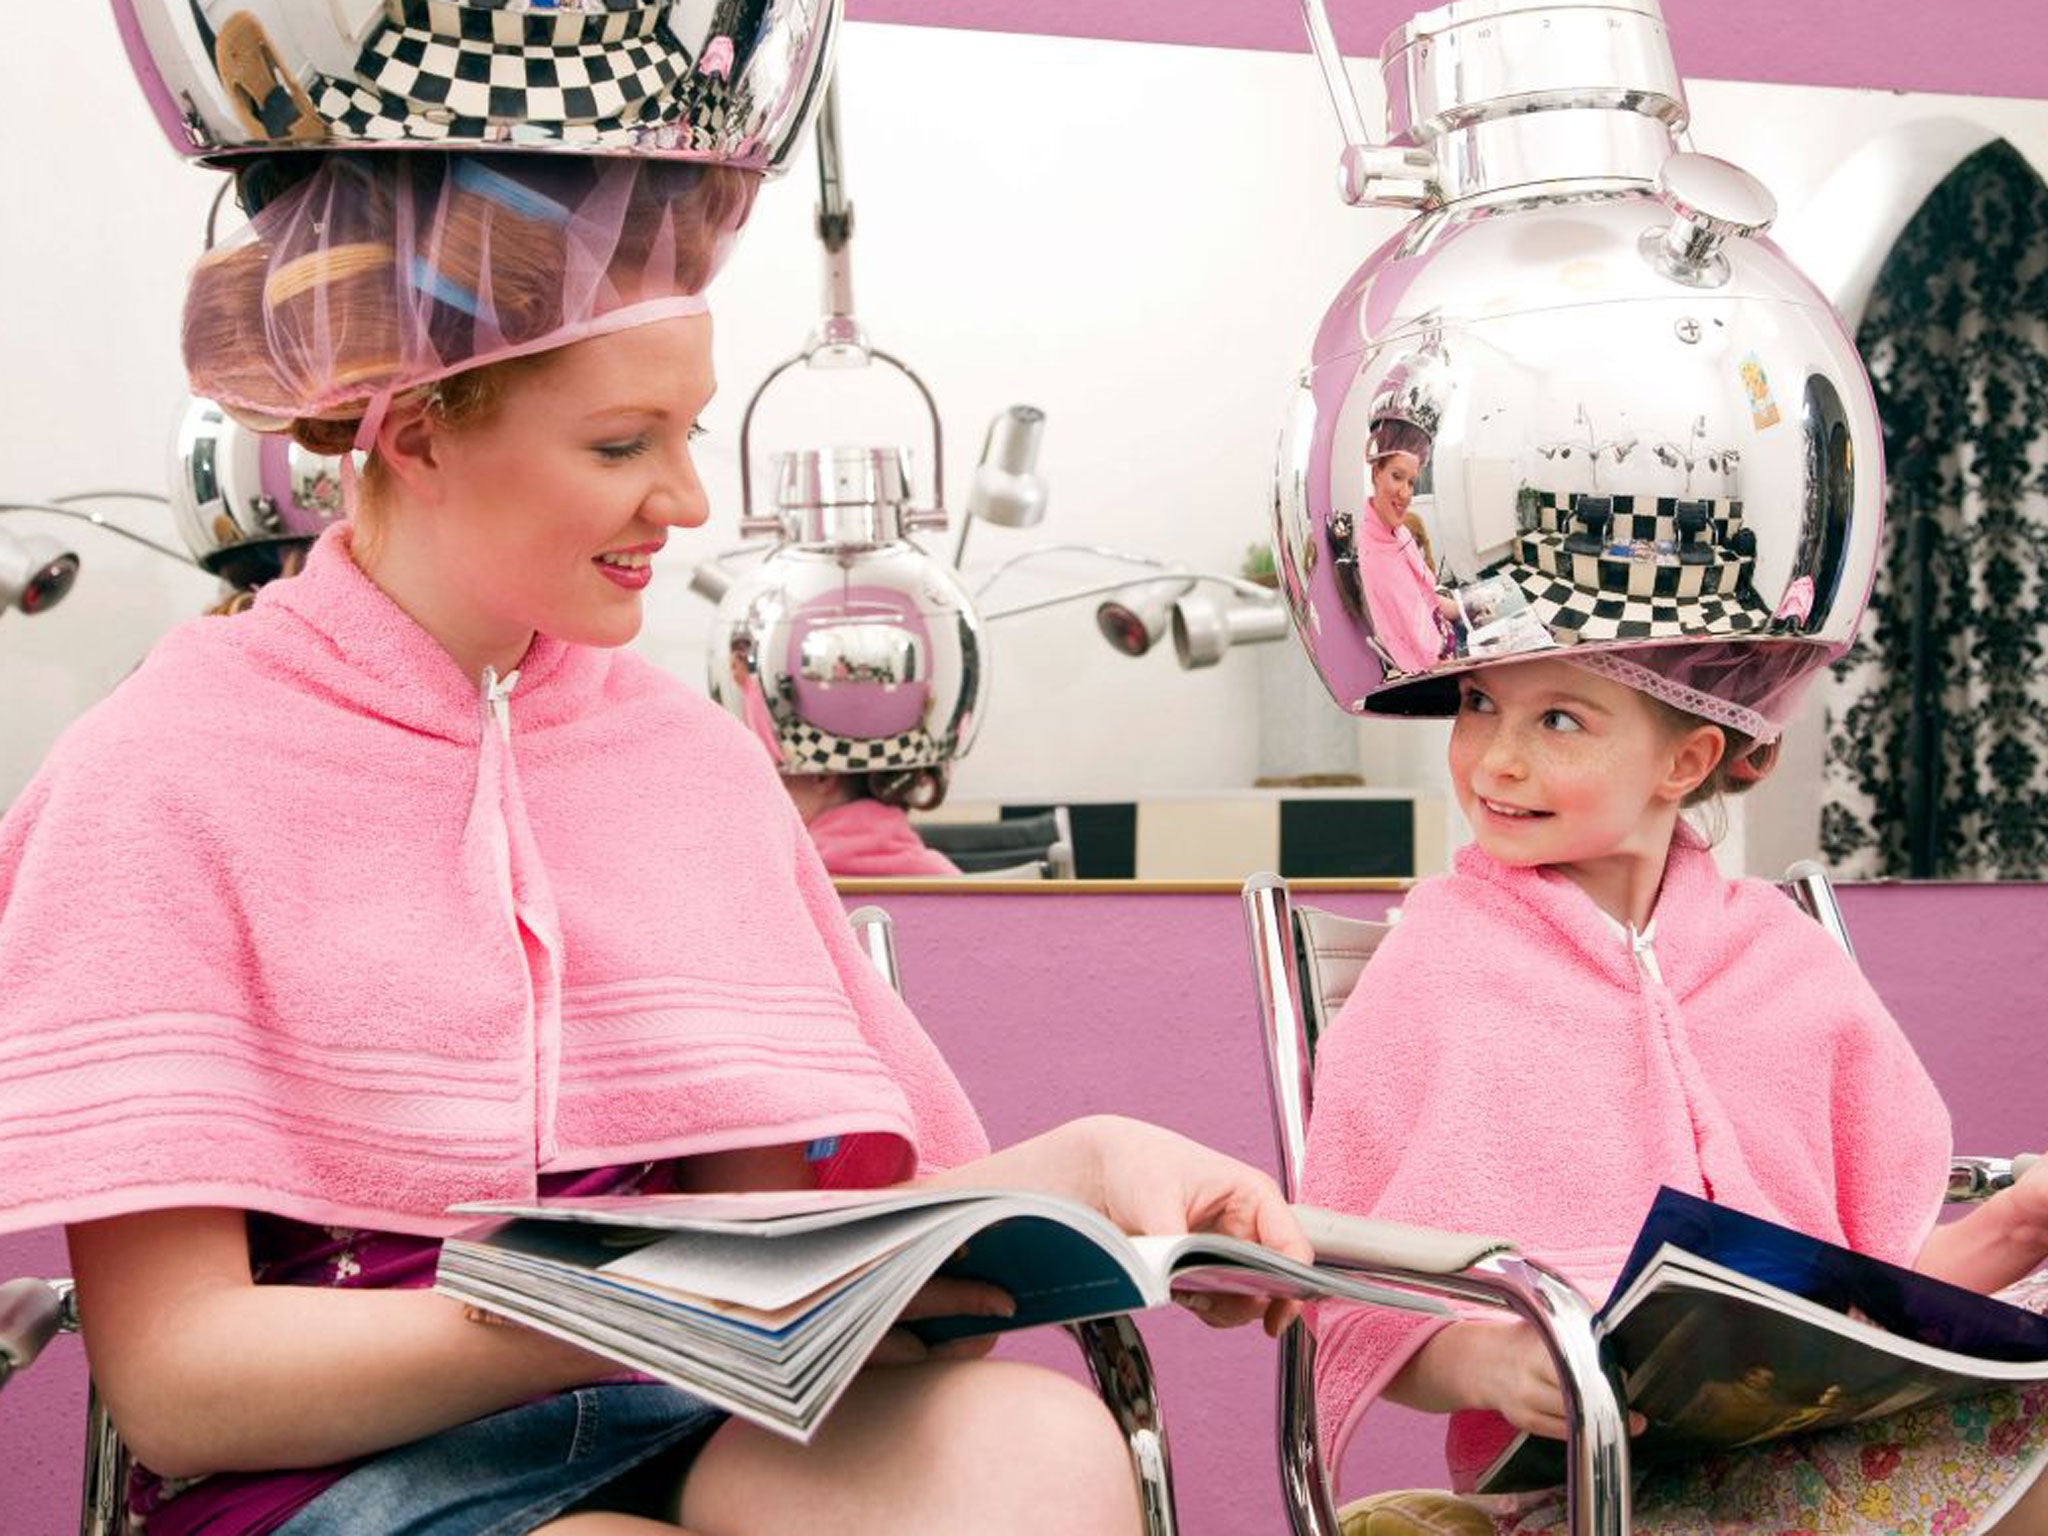 A young woman and little girl at a hair salon